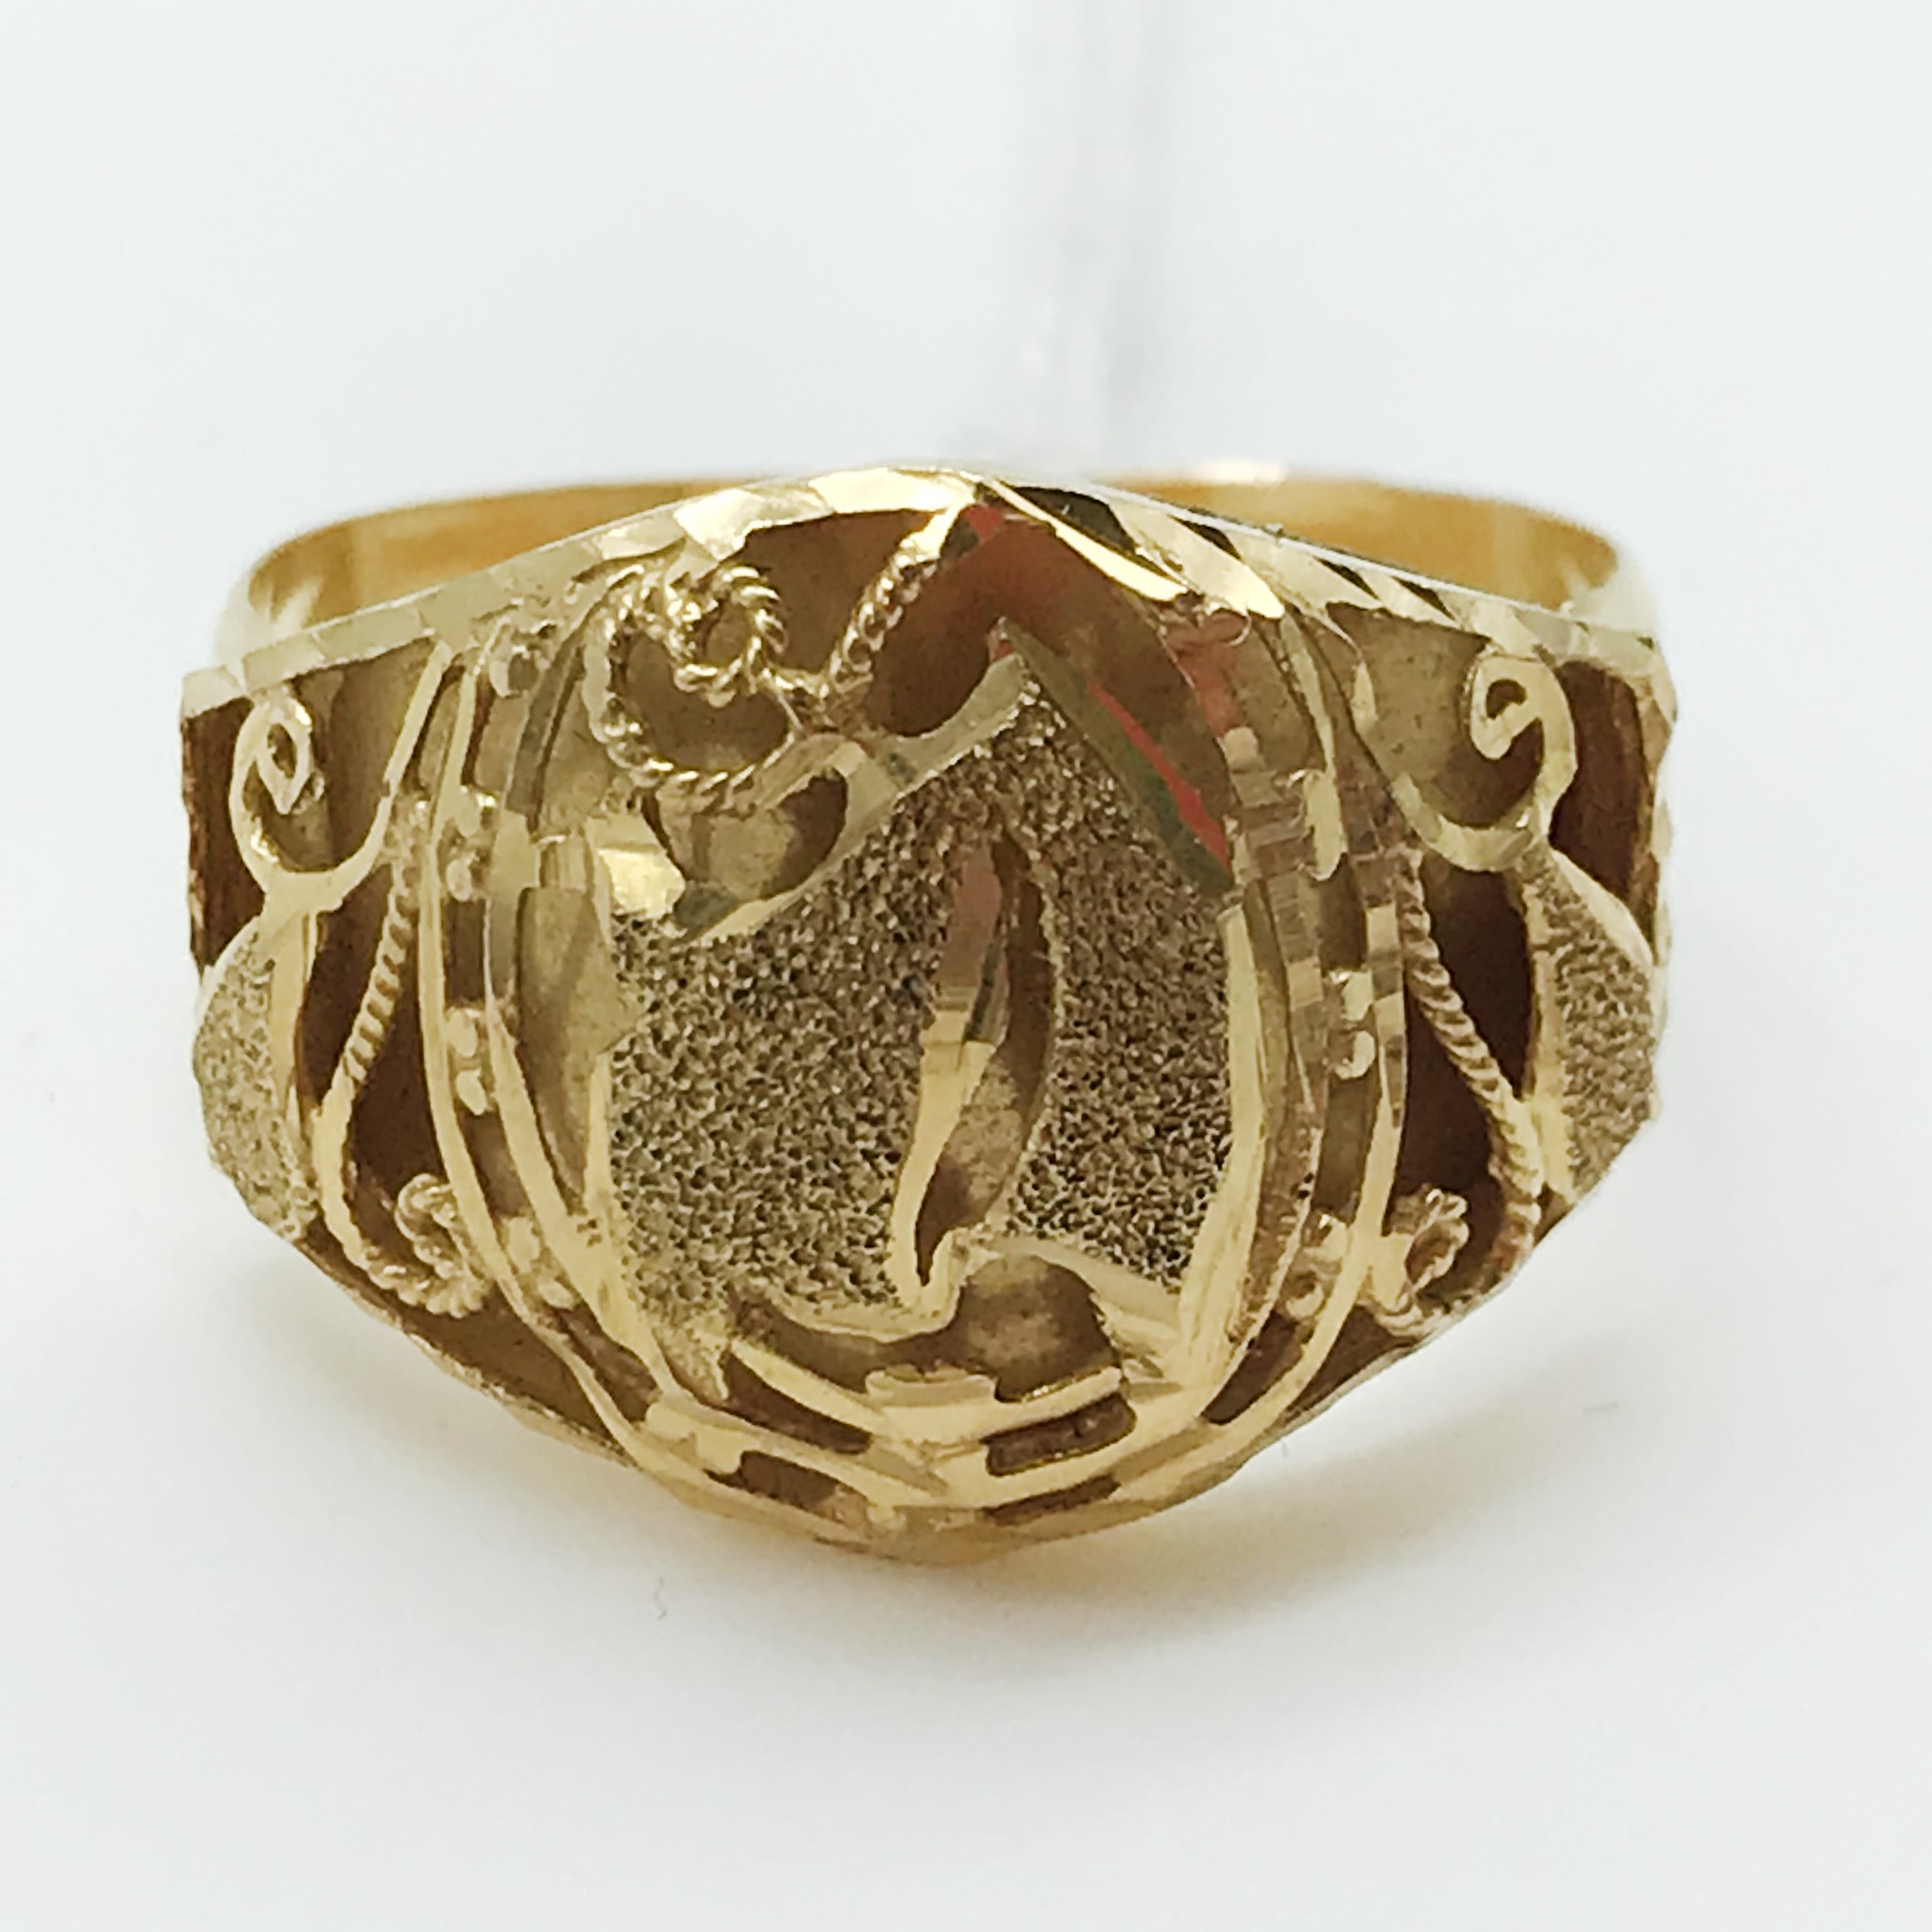 HIGH CARAT EGYPTIAN GOLD RING - Image 2 of 6